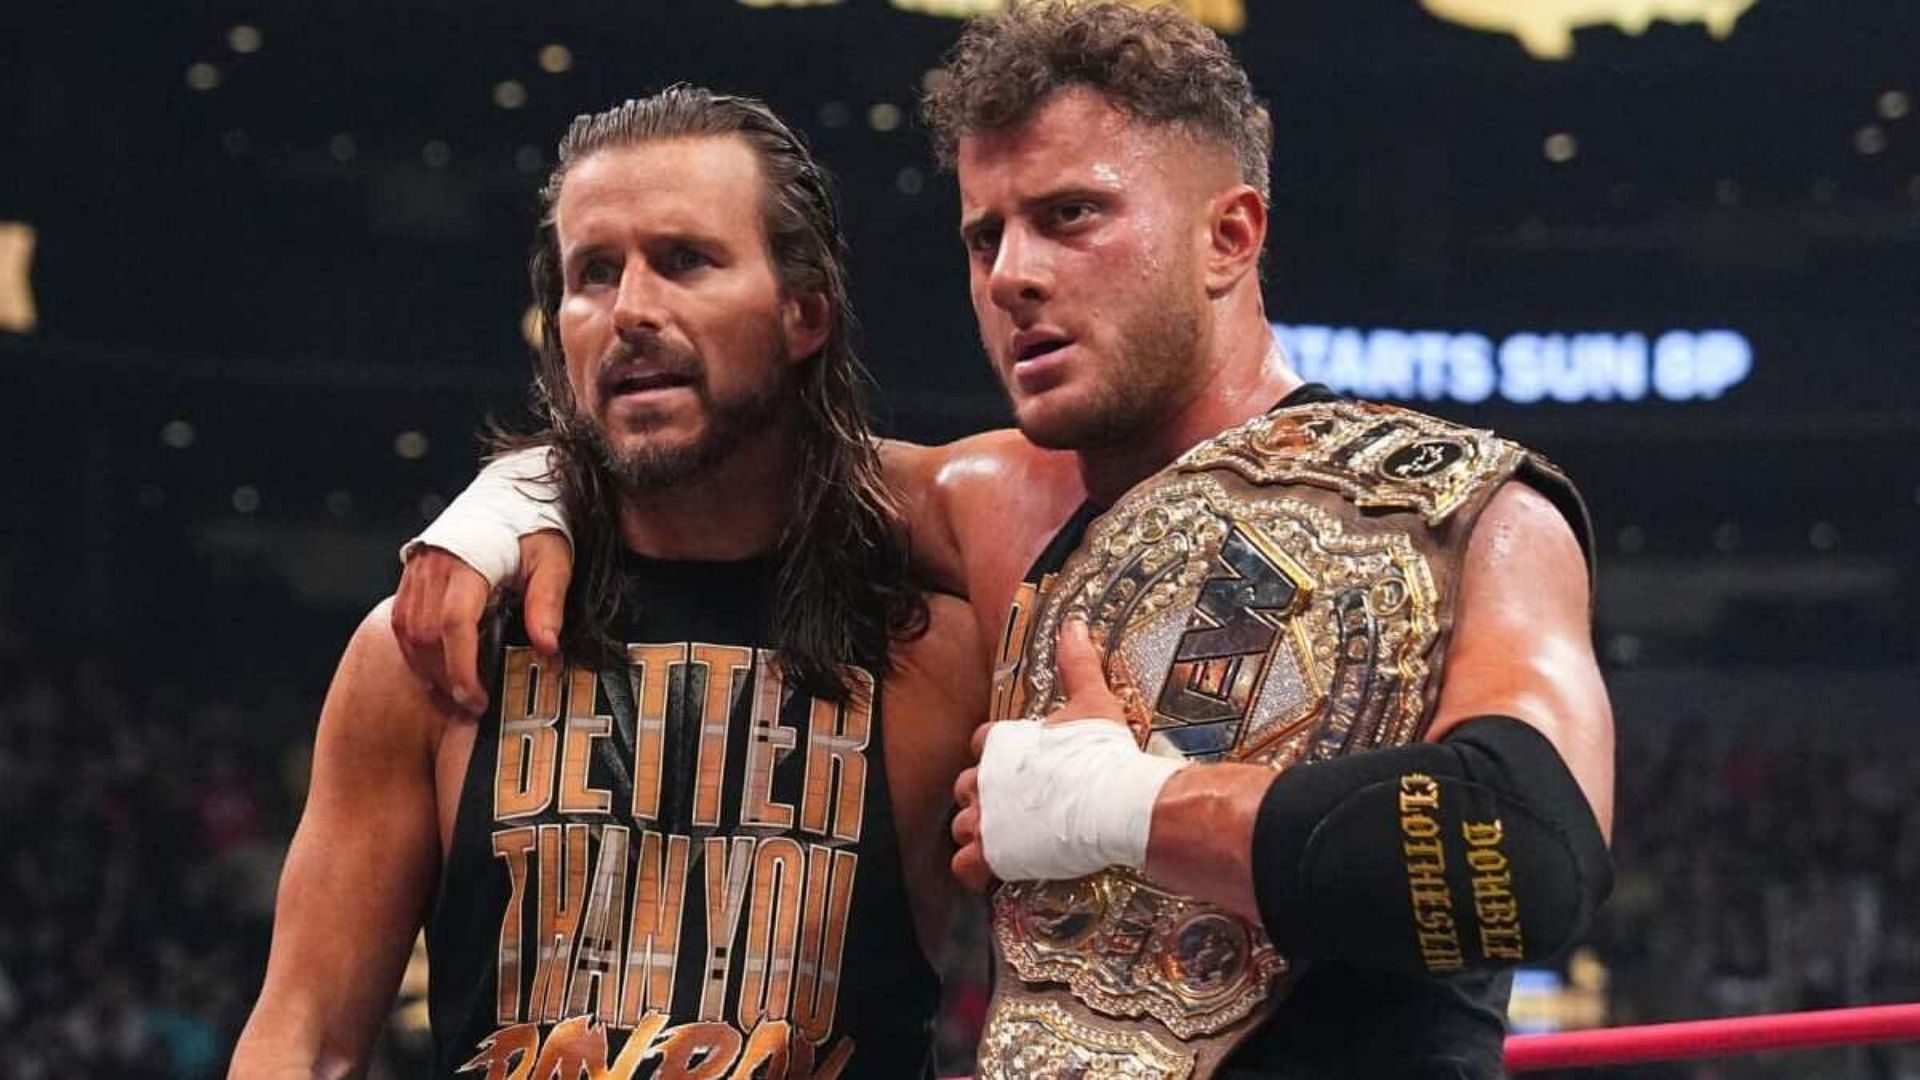 Better than You Bay Bay are the current ROH Tag Team Champions